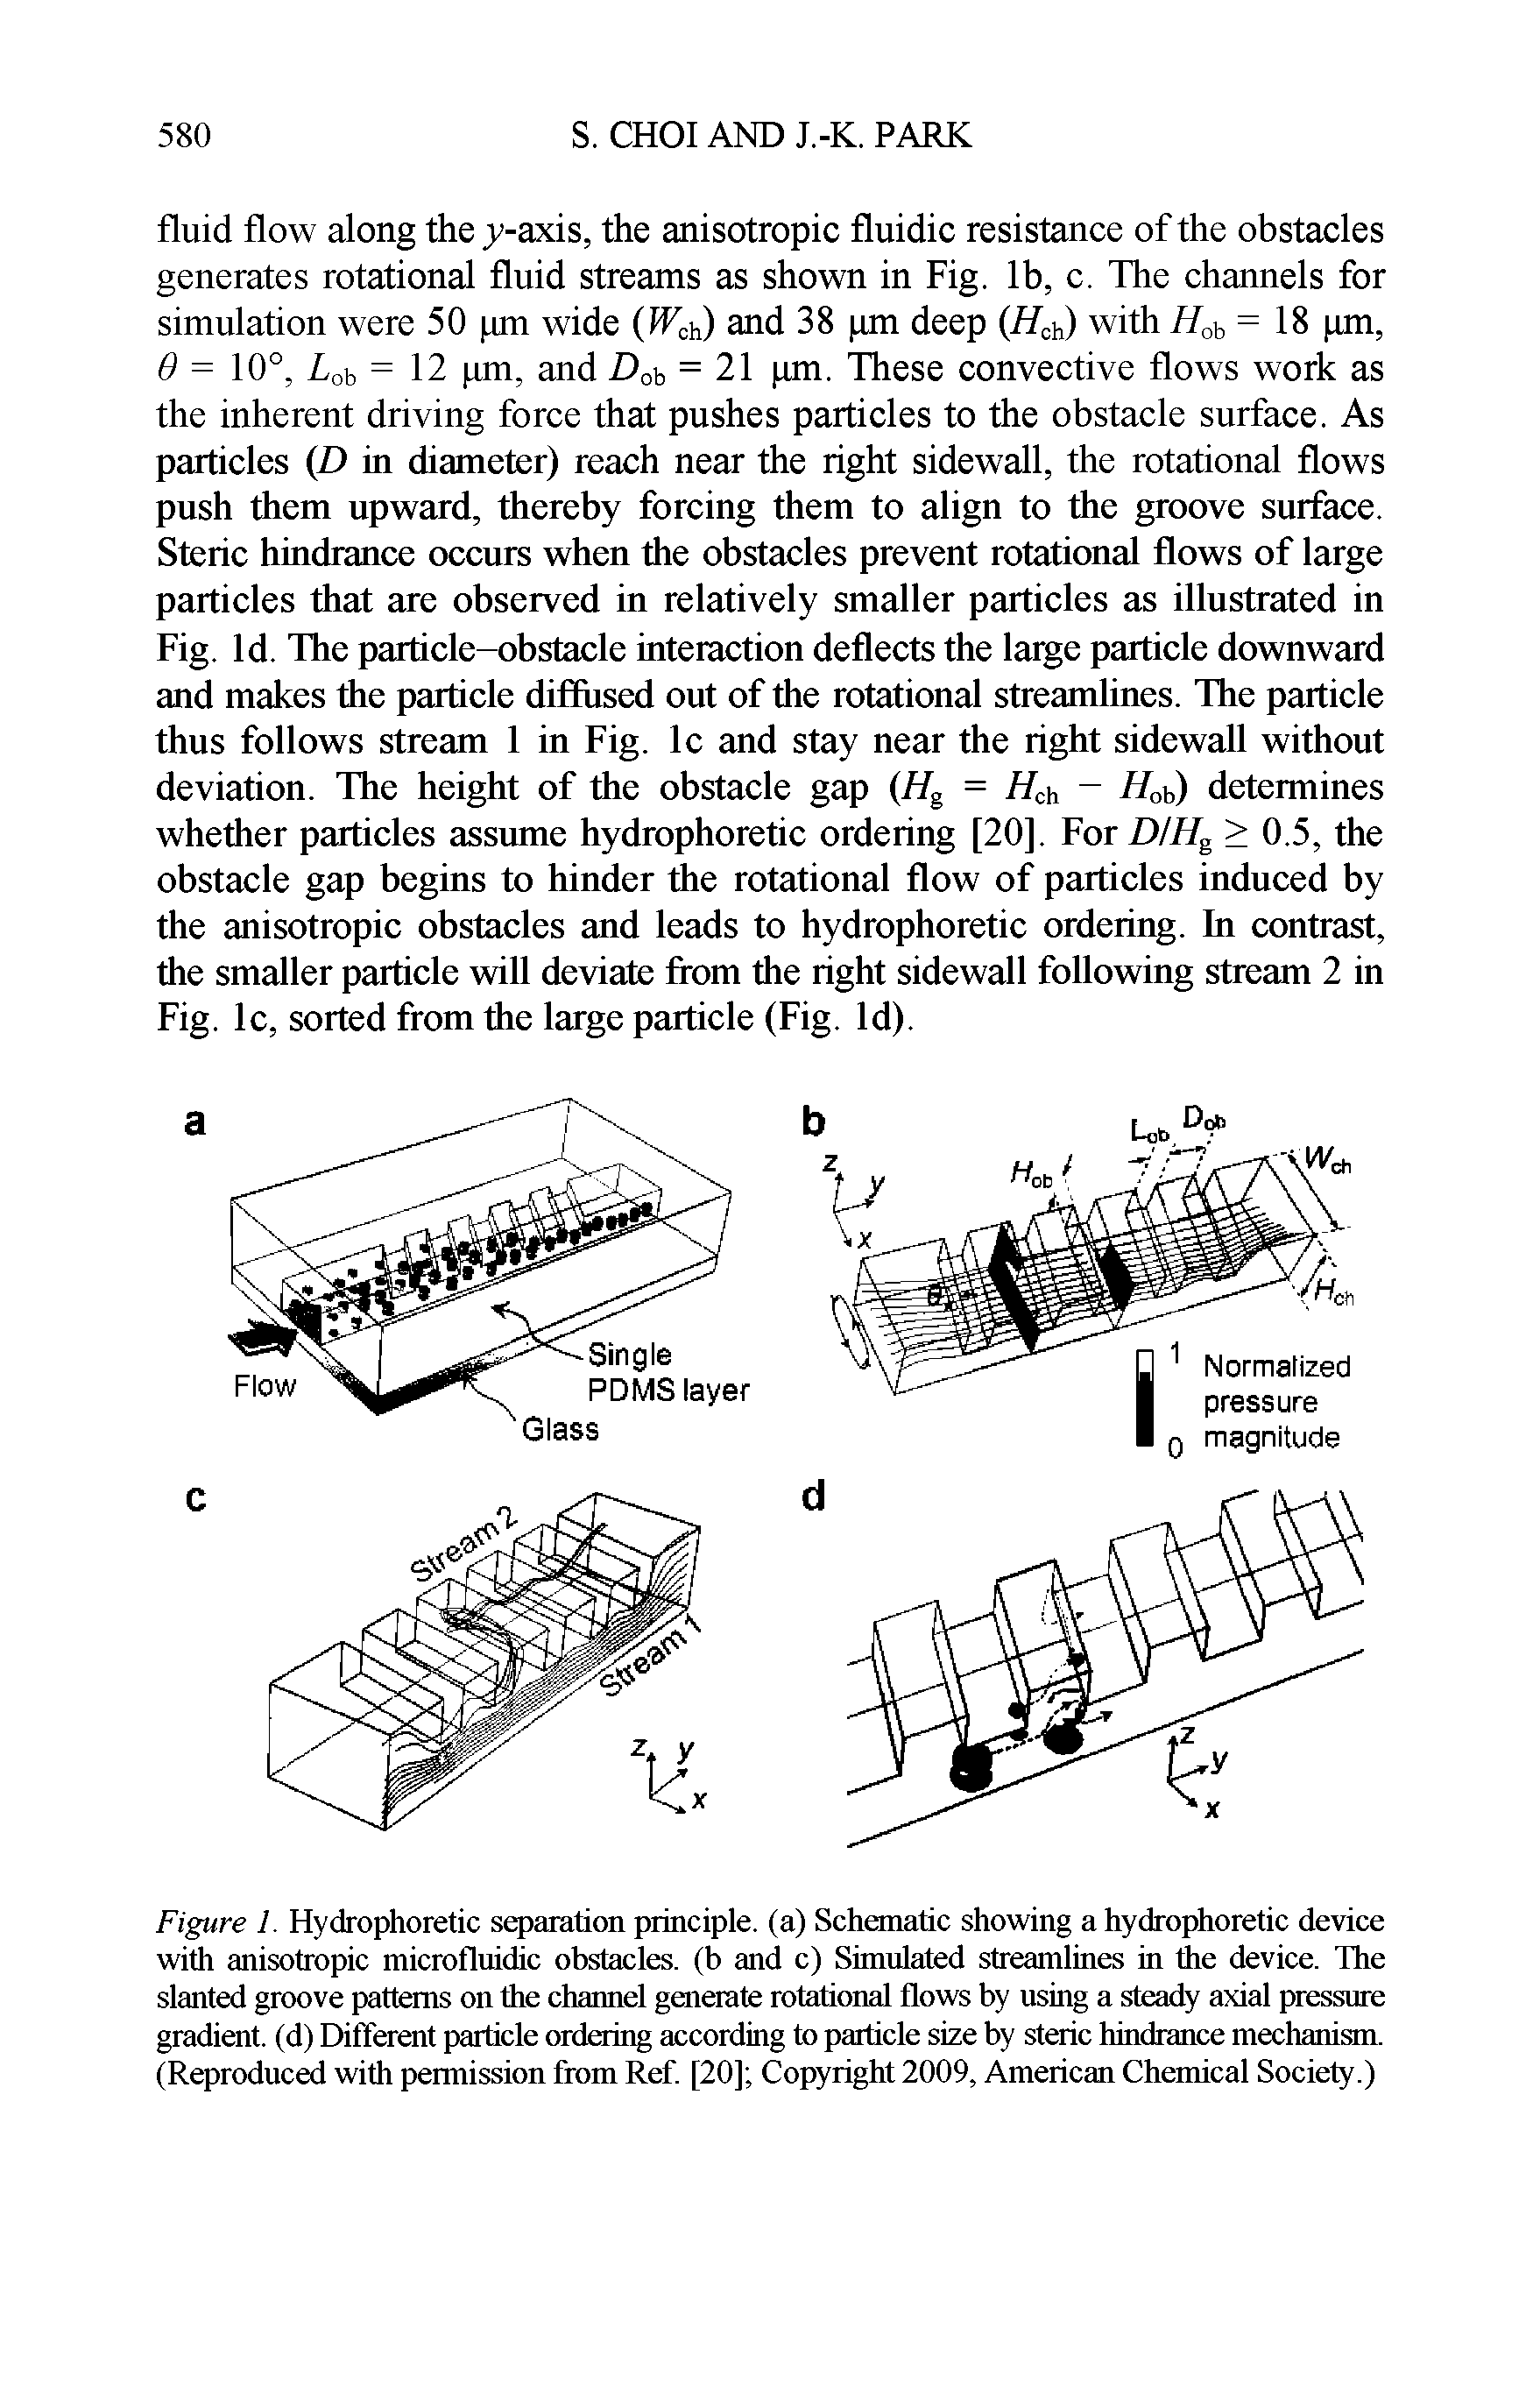 Figure 1. Hydrophoretic separation principle, (a) Schematic showing a hydrophoretic device with anisotropic microfluidic obstacles, (b and c) Simulated streamlines in the device. The slanted groove patterns on the channel generate rotational flows by using a steady axial pressure gradient, (d) Different particle ordering according to particle size by steric hindrance mechanism. (Reproduced with permission from Ref [20] Copyright 2009, American Chemical Society.)...